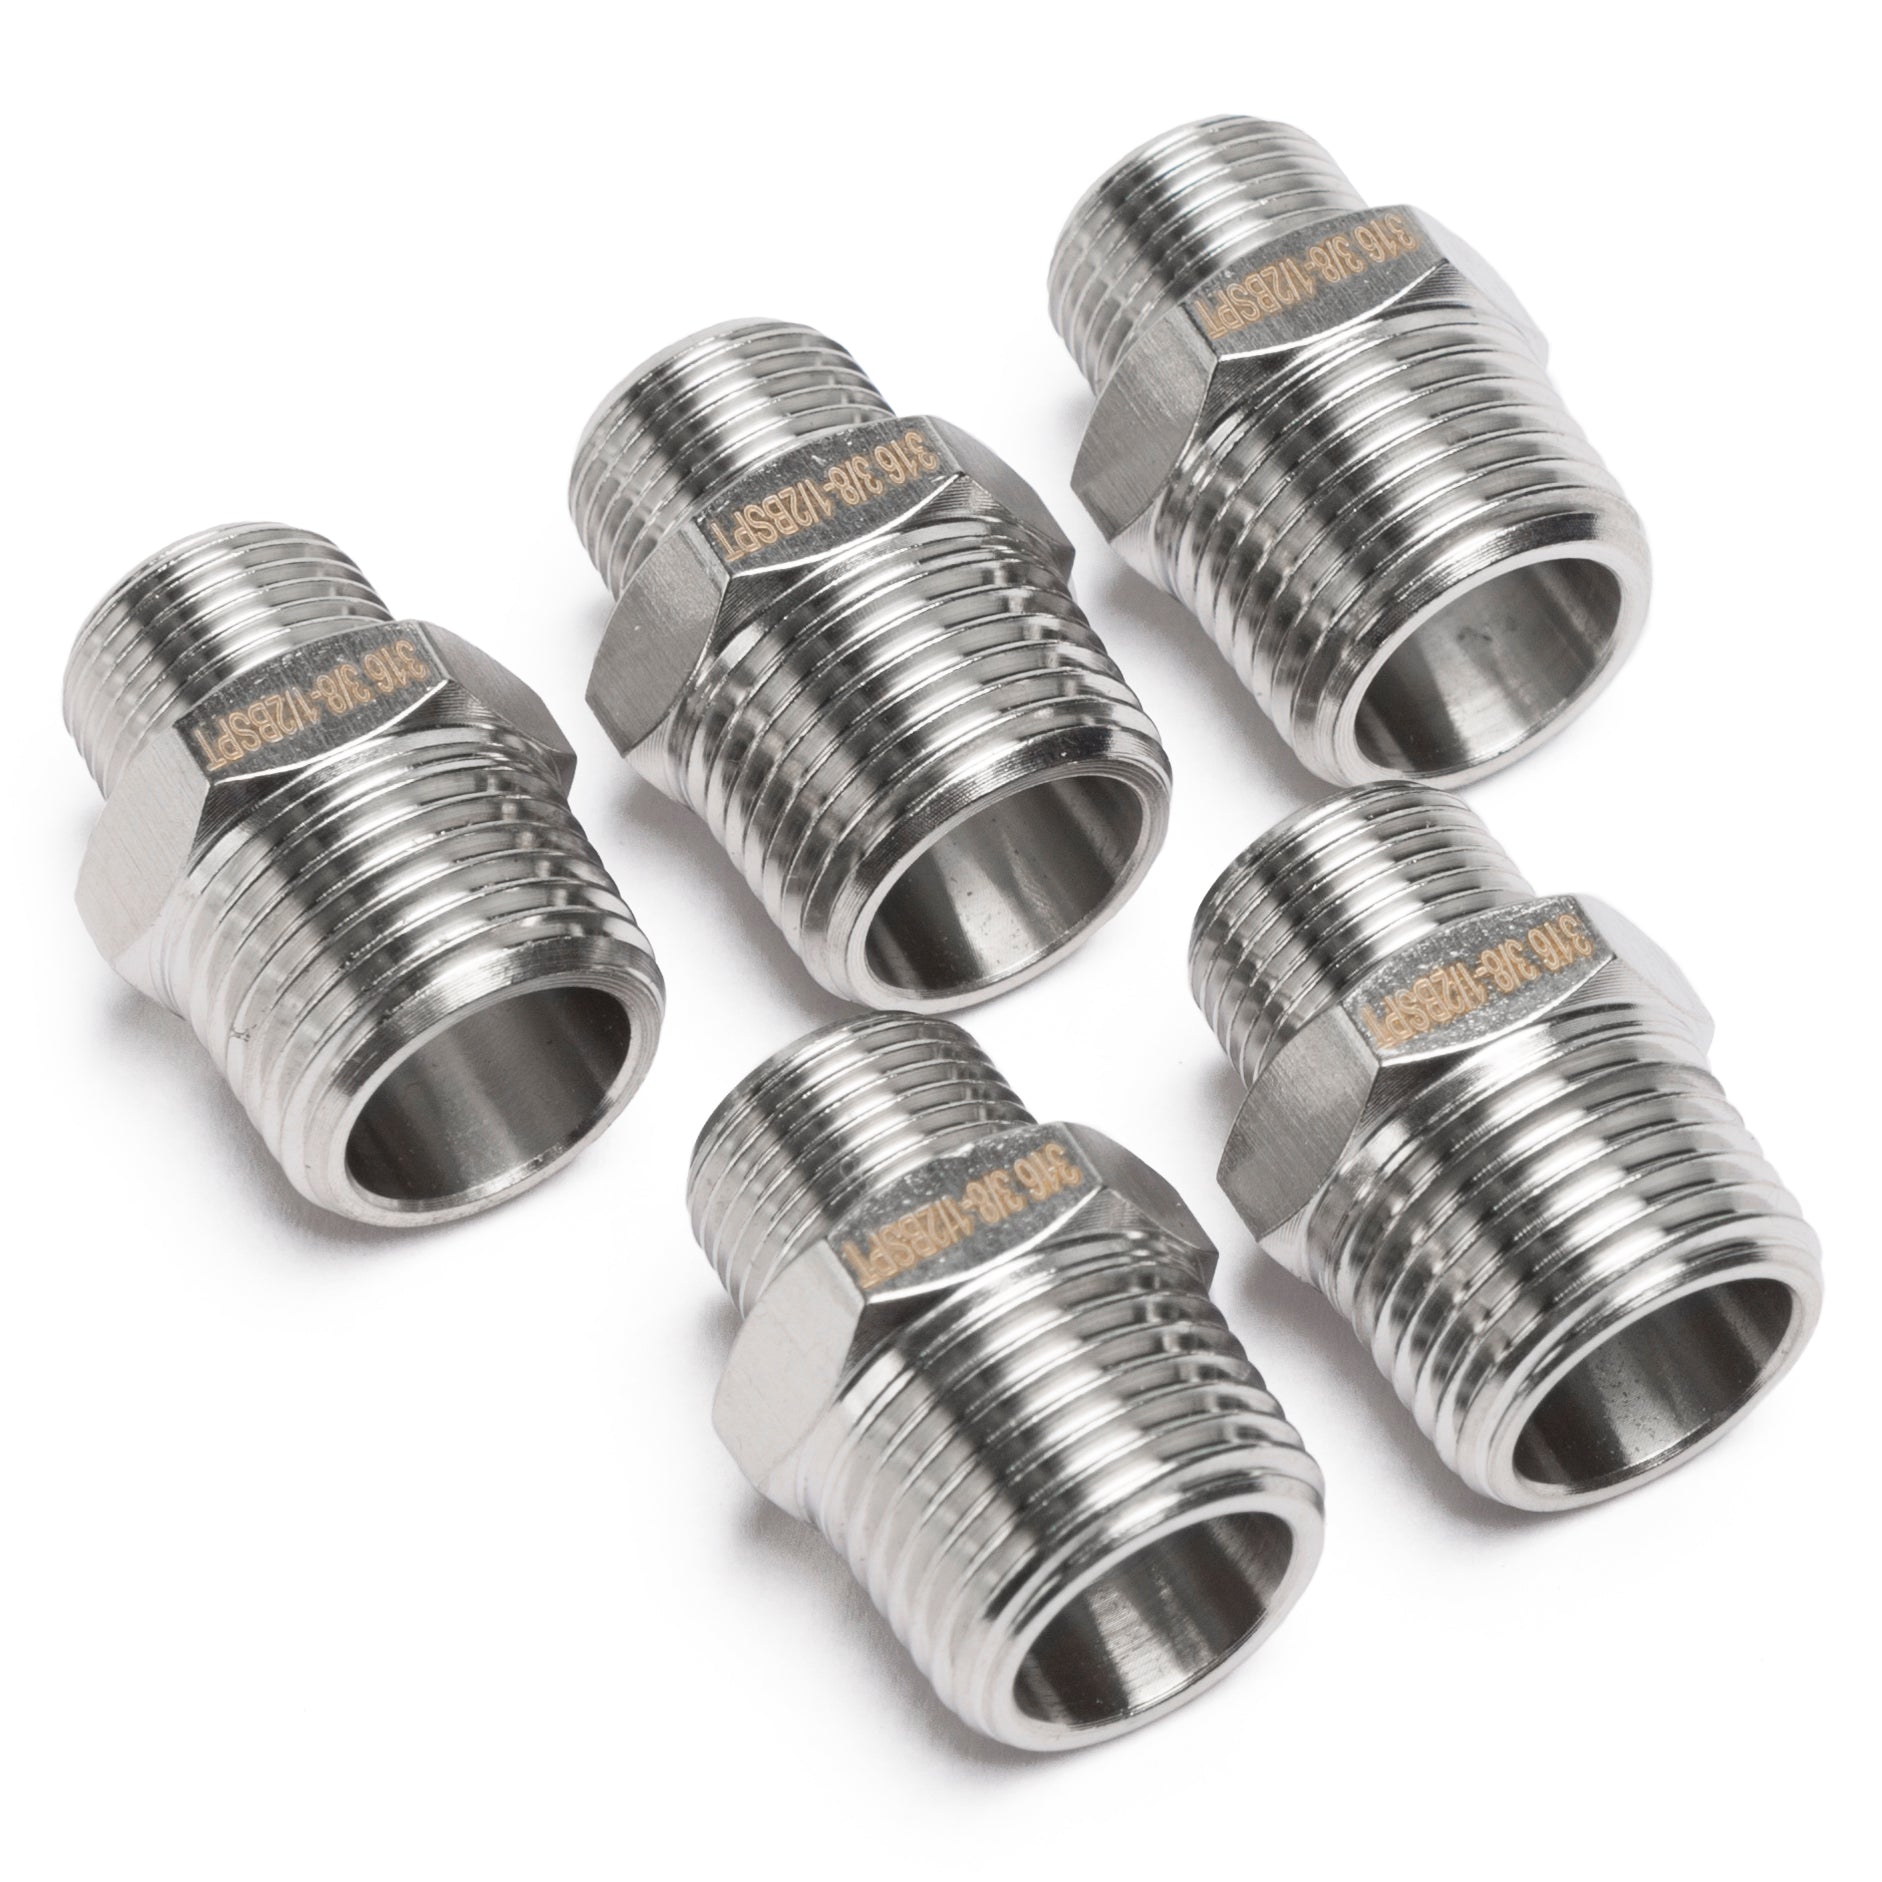 LTWFITTING Stainless Steel 316 Pipe Hex Reducing Nipple Fitting 1/2-Inch x 3/8-Inch Male BSPT (Pack of 5)